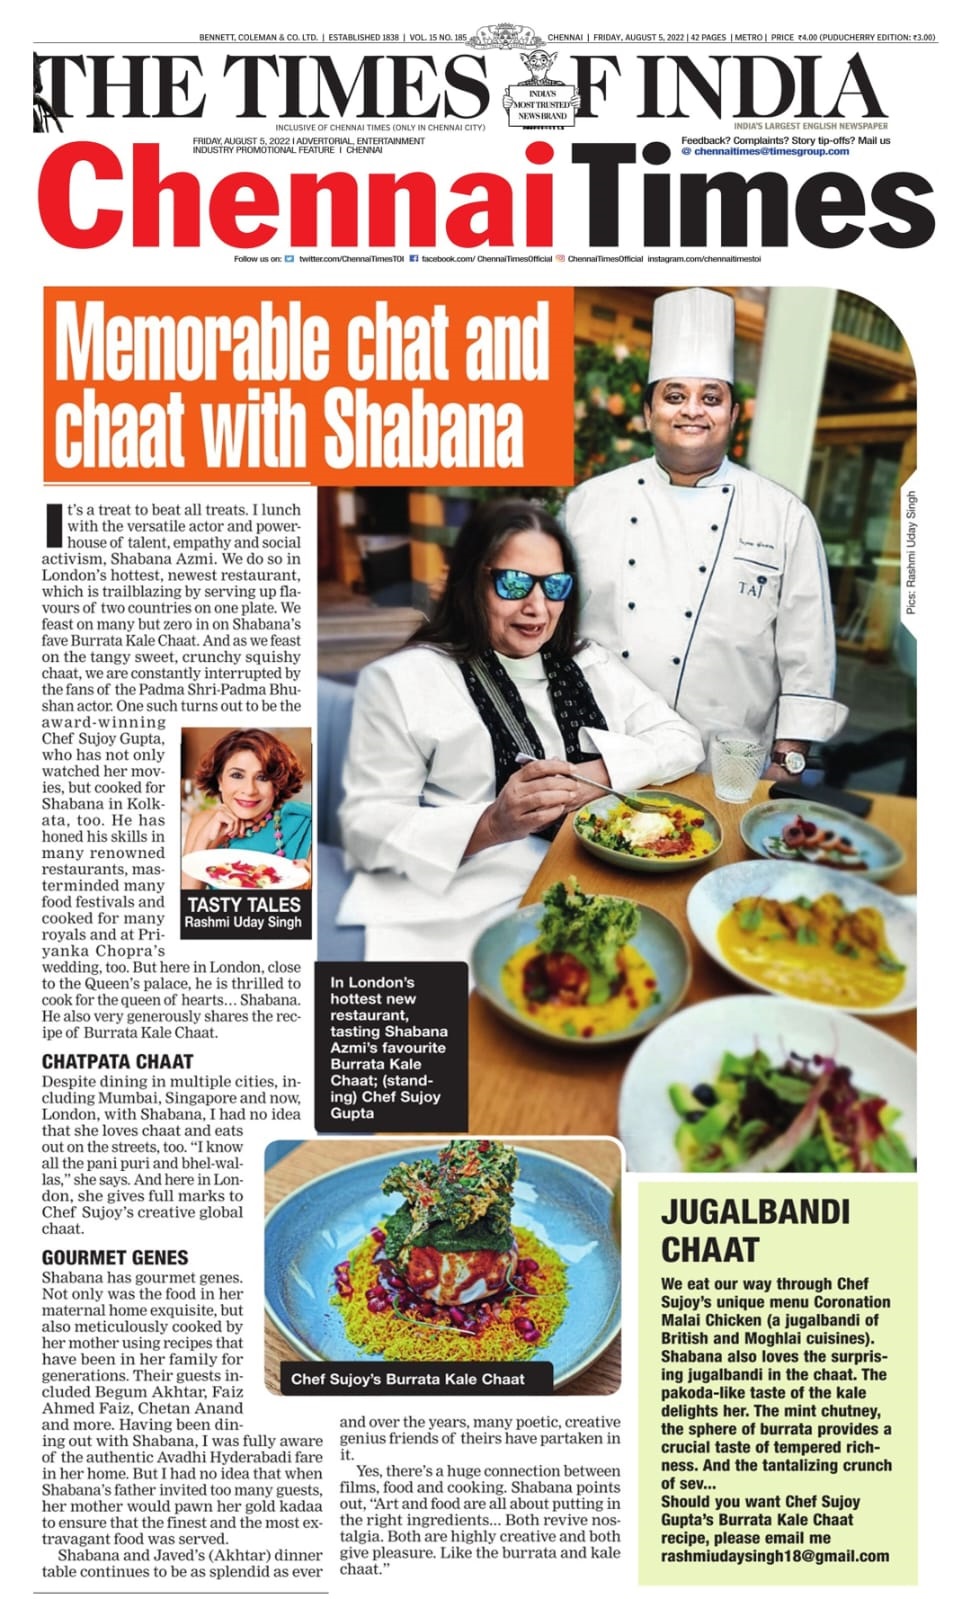 Memorable chat and chaat with Shabana